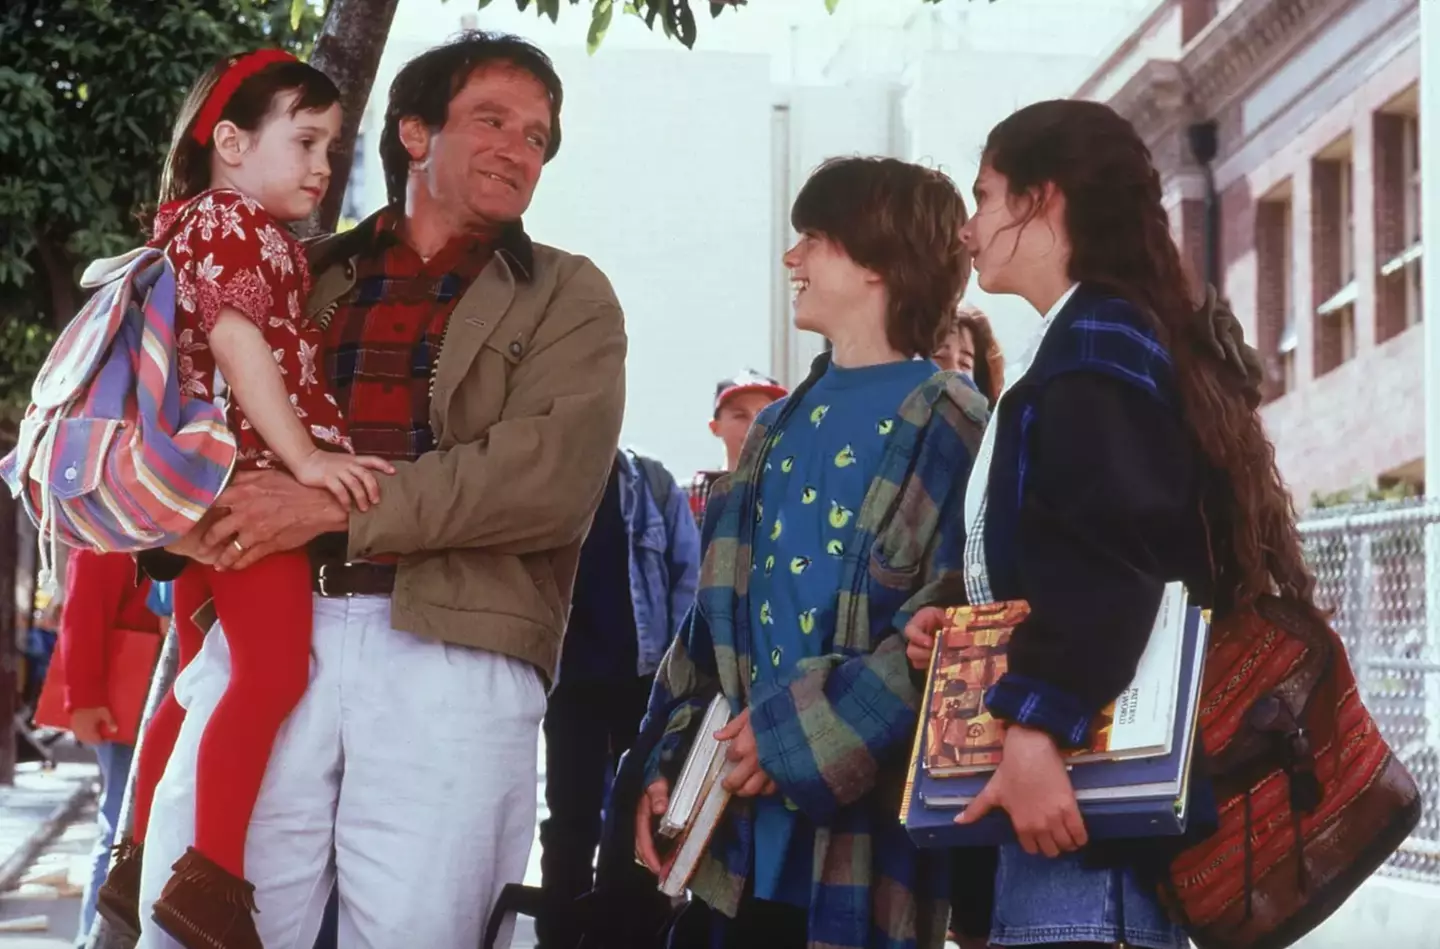 21 years after it was released, Mrs Doubtfire remains one of Robin Williams' most beloved roles (20th Century Studios)